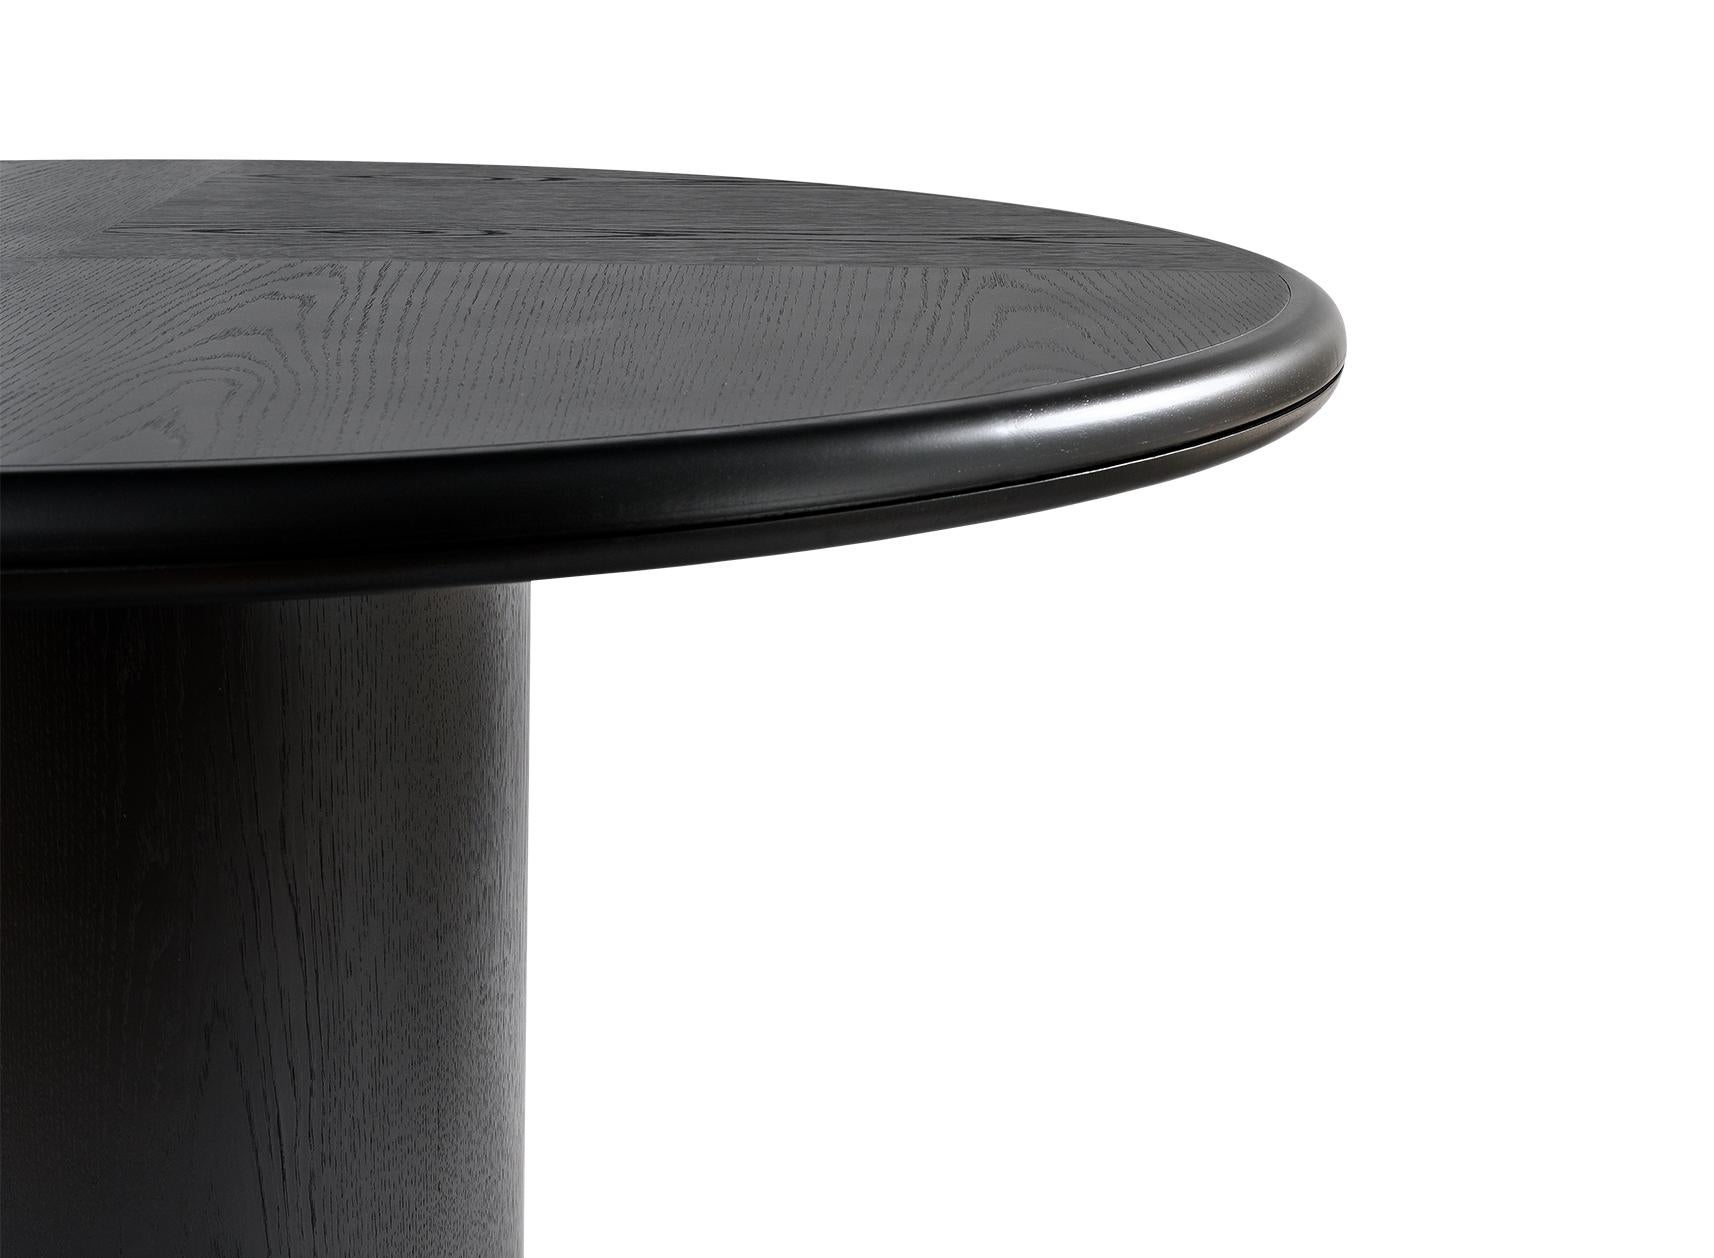 MOON
Black brushed oak, round dining table.
Available in different dimensions.

Designed by Buket Hoscan Bazman